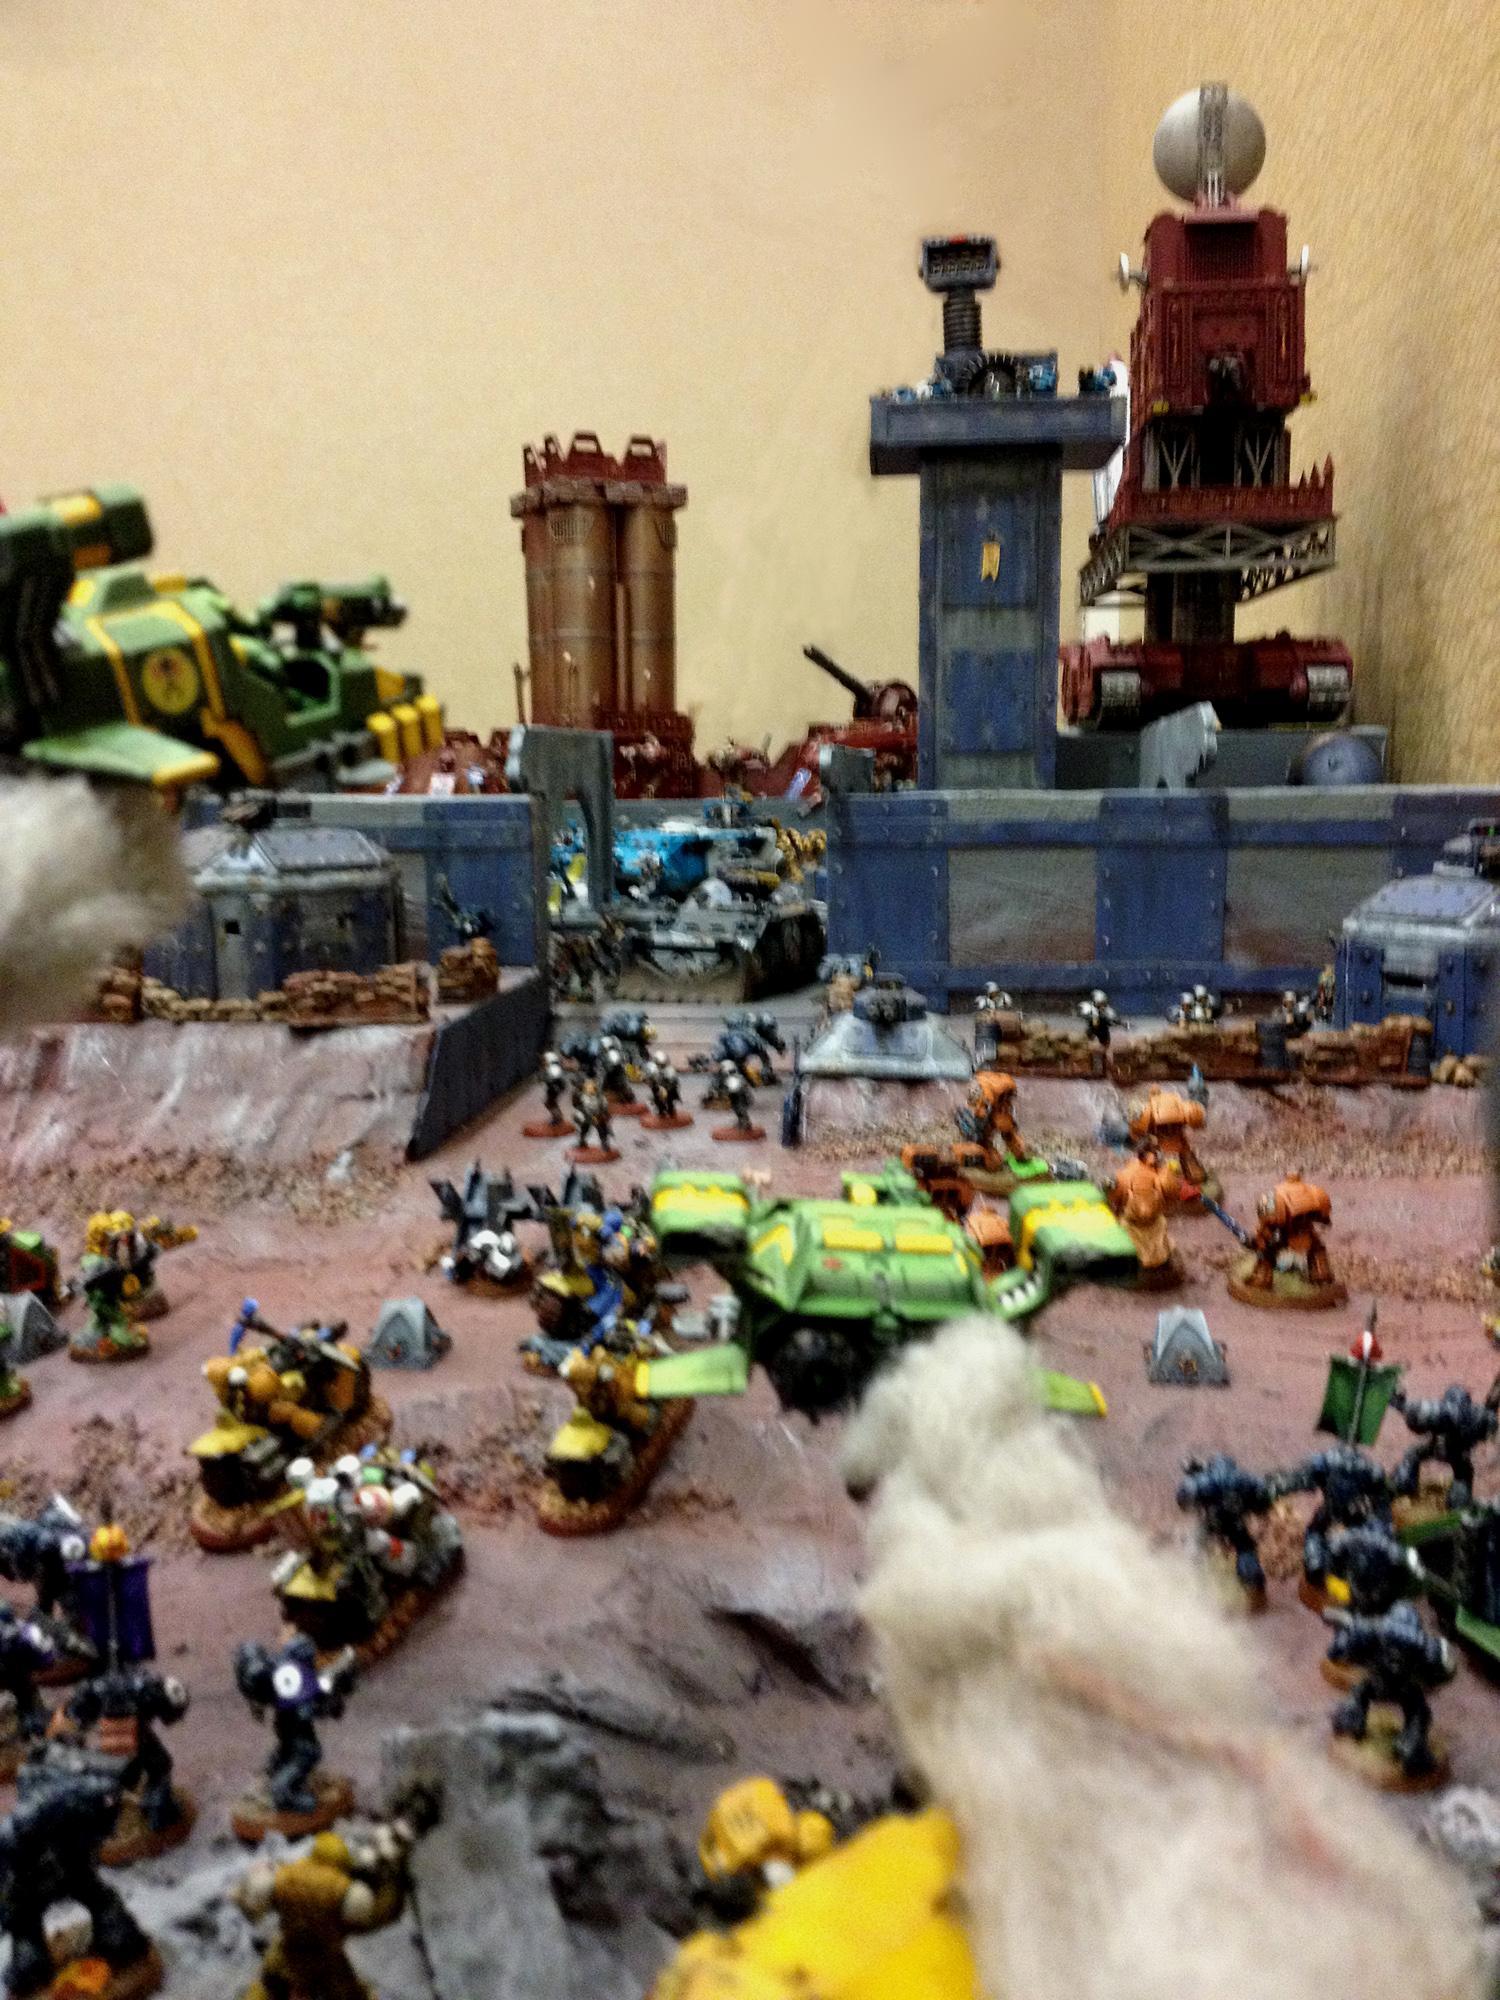 Typhoon's Eye View of the Battle for Forgepoint Manufactorum